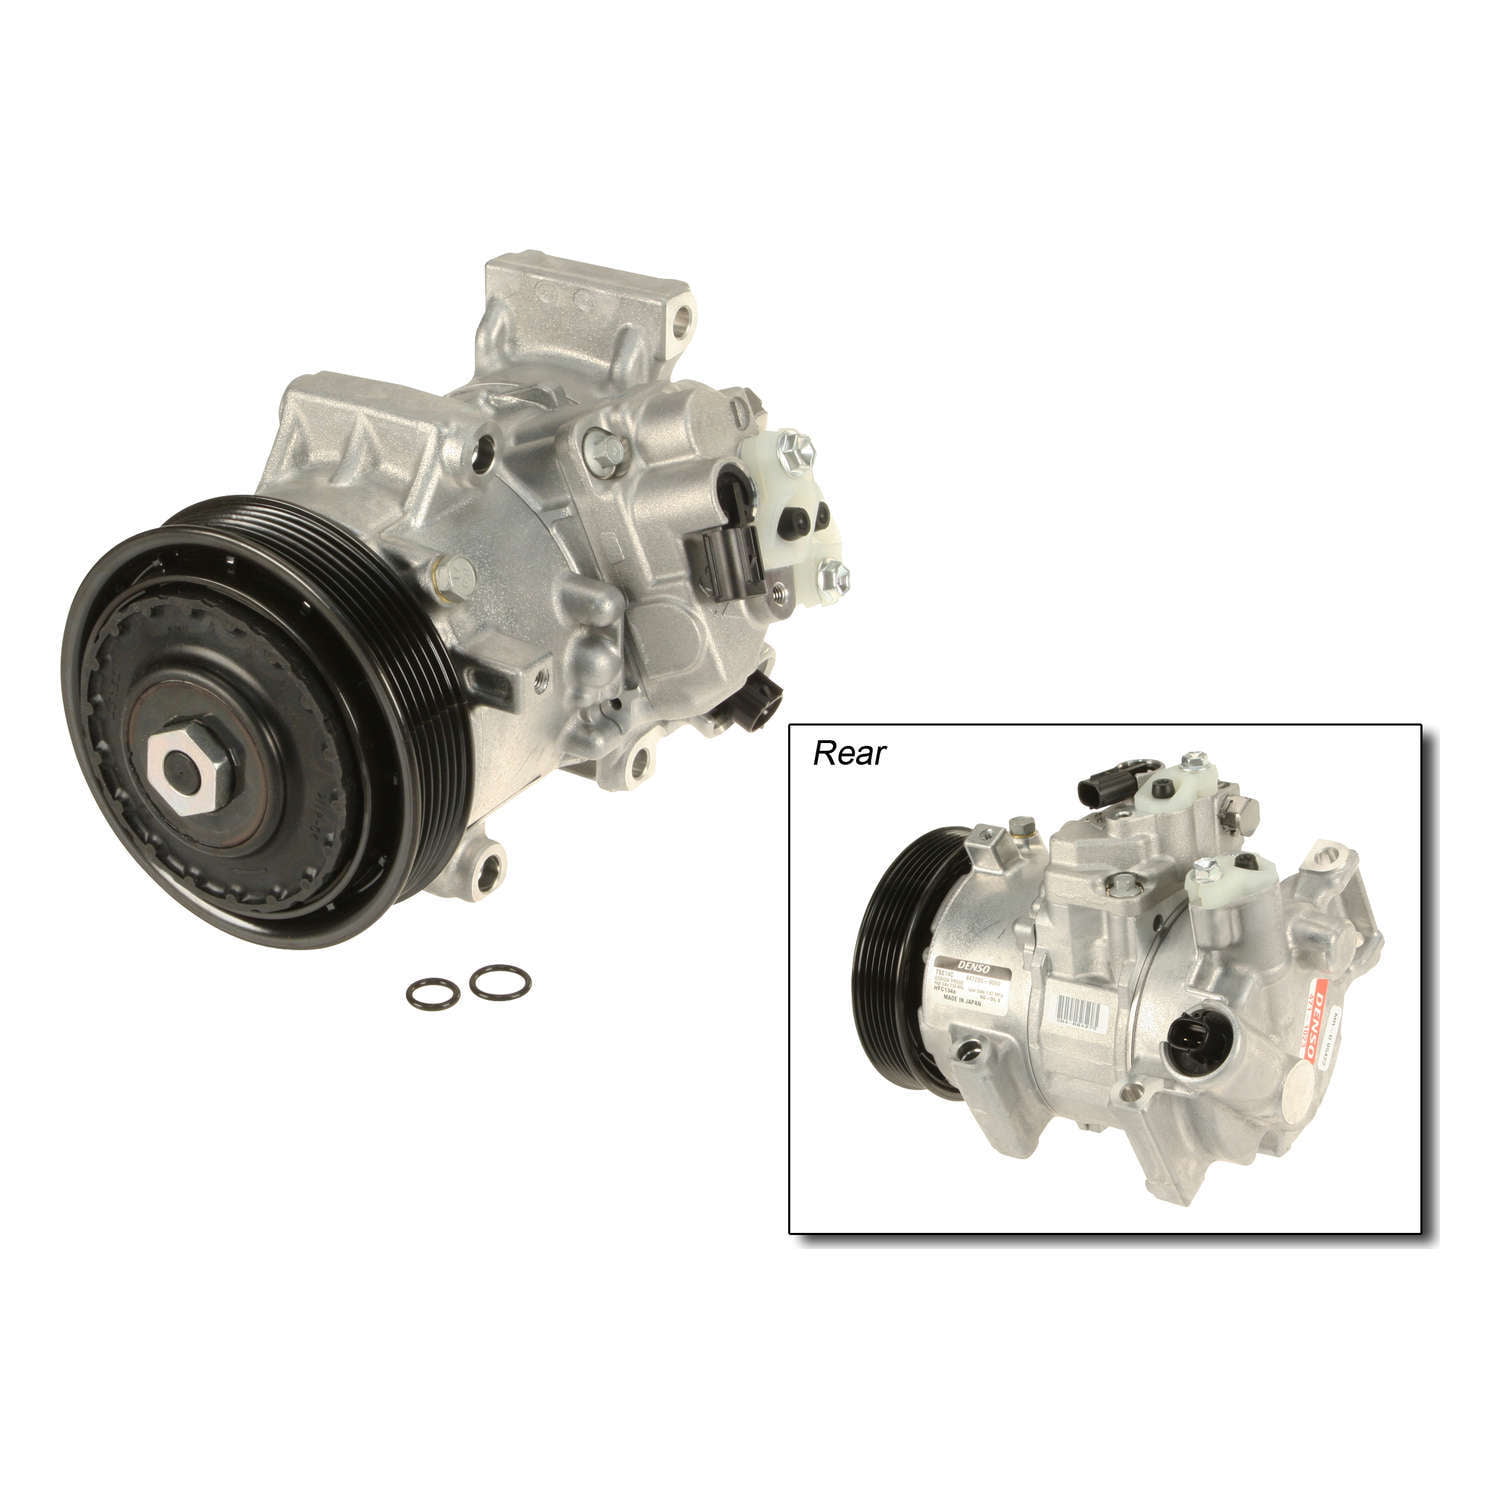 cciyu AC Compressor and A/C Clutches Set for Infiniti FX35 2003-2008 Replacement fit for CO 11149RW Auto Repair Compressors Assembly 